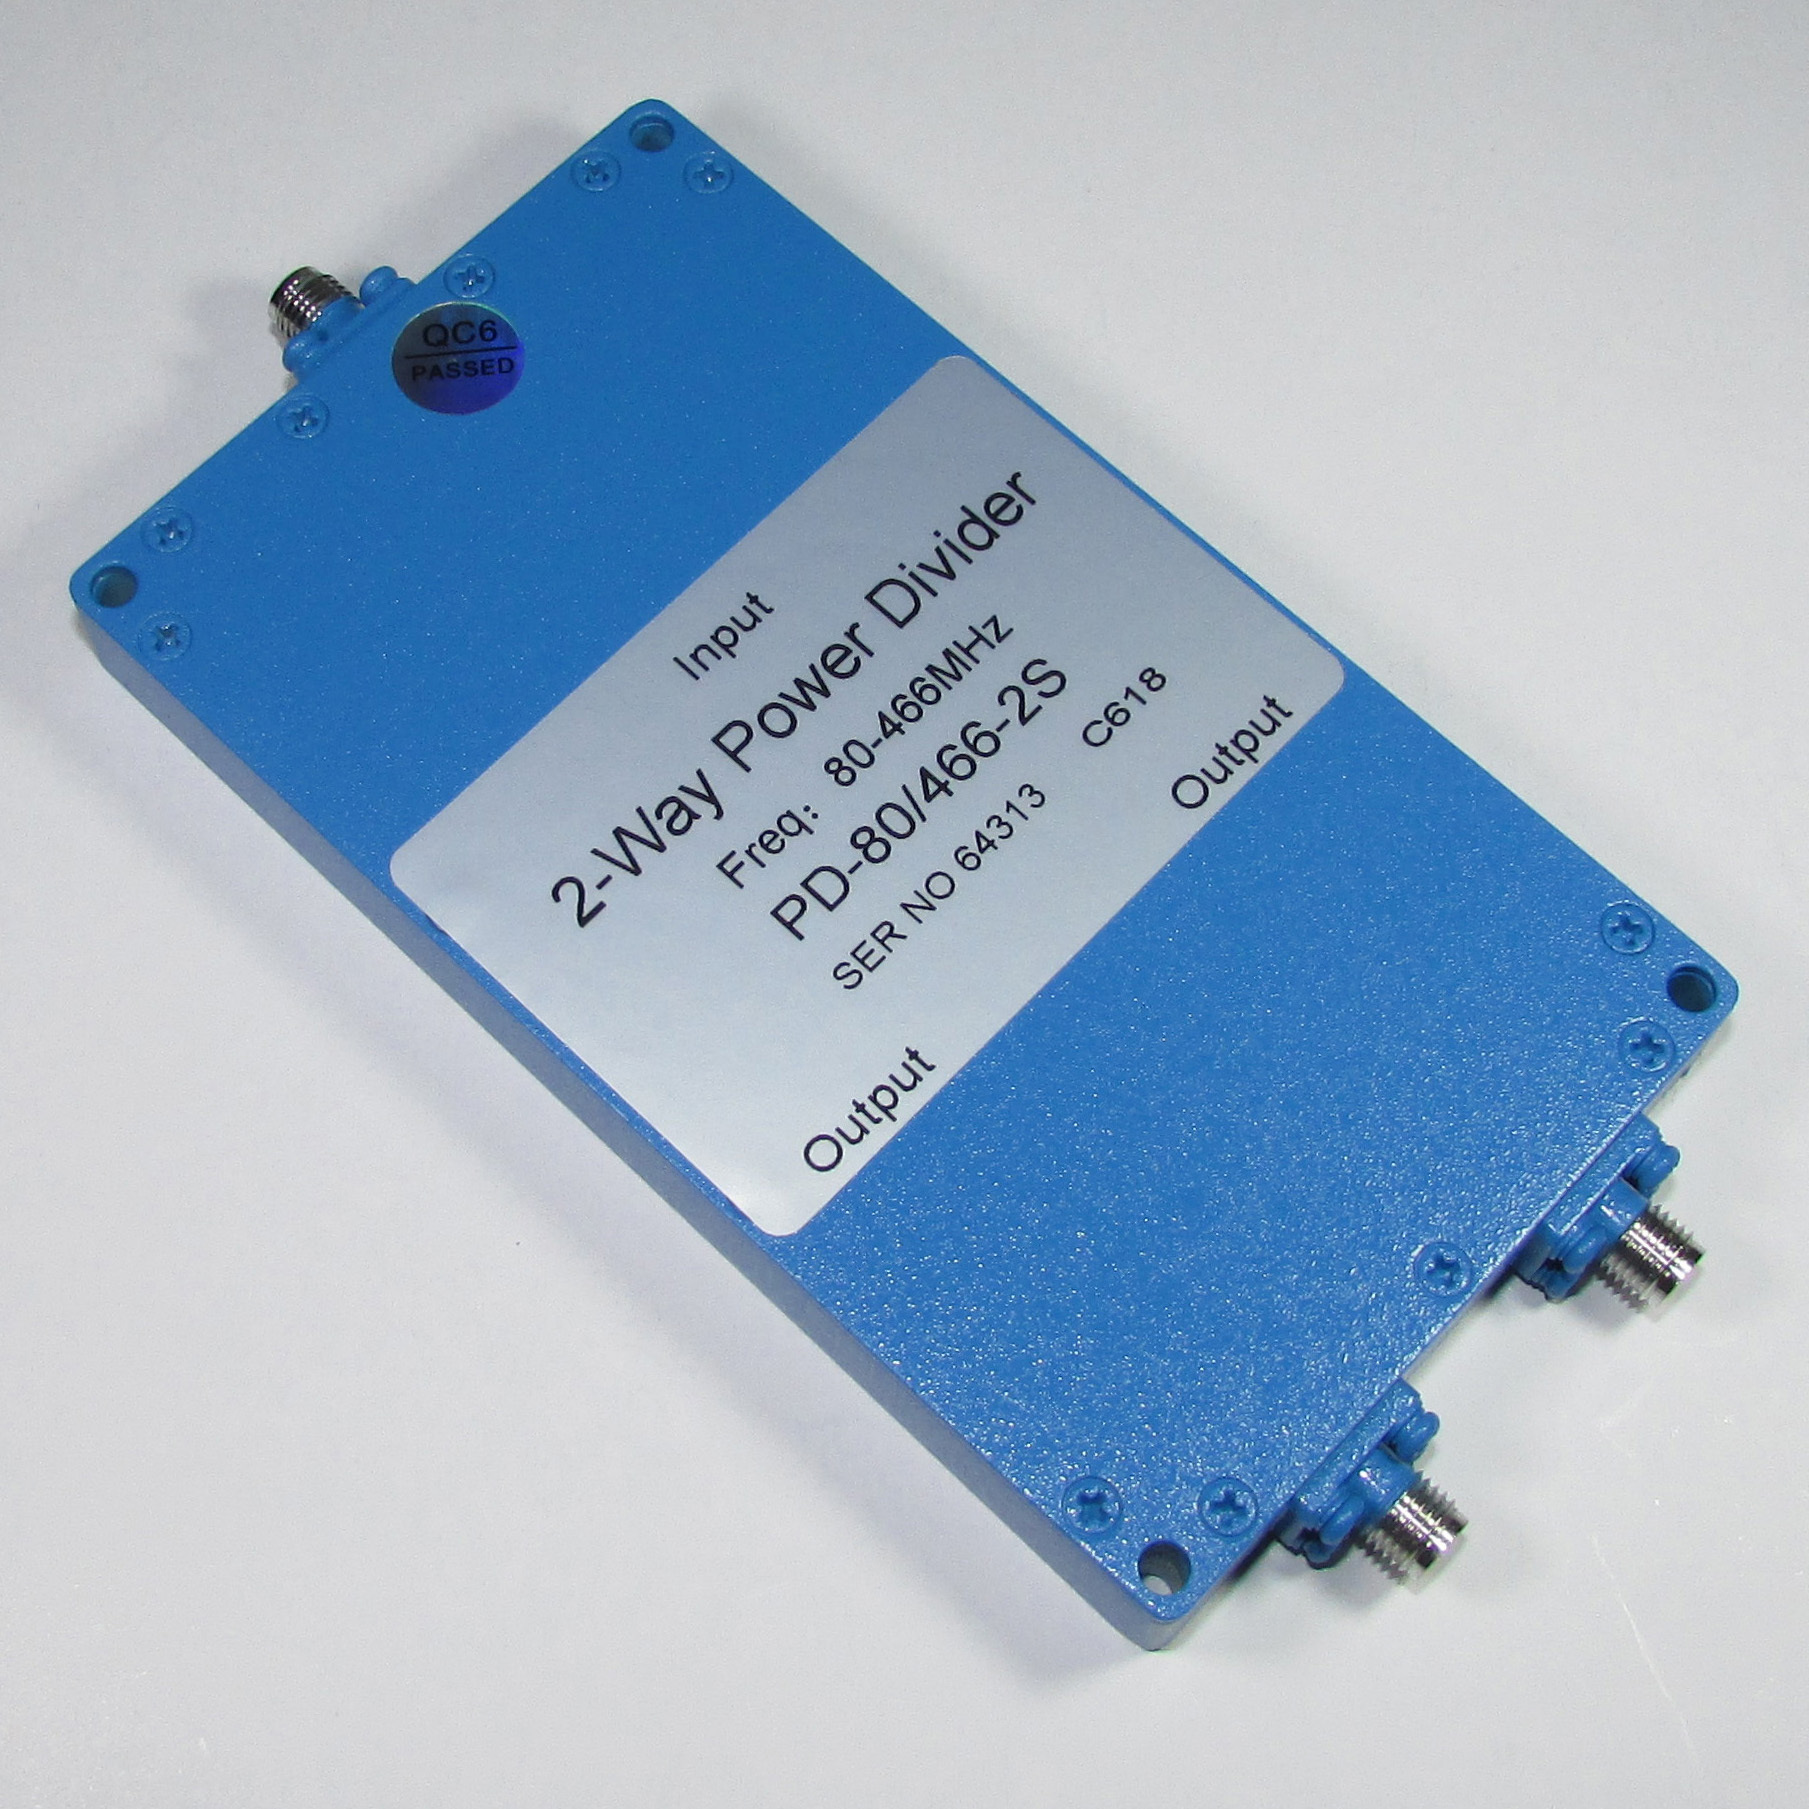 PD-80 / 466-2S 80-466MHz 30W one point two RF microwave power divider / new one year warranty